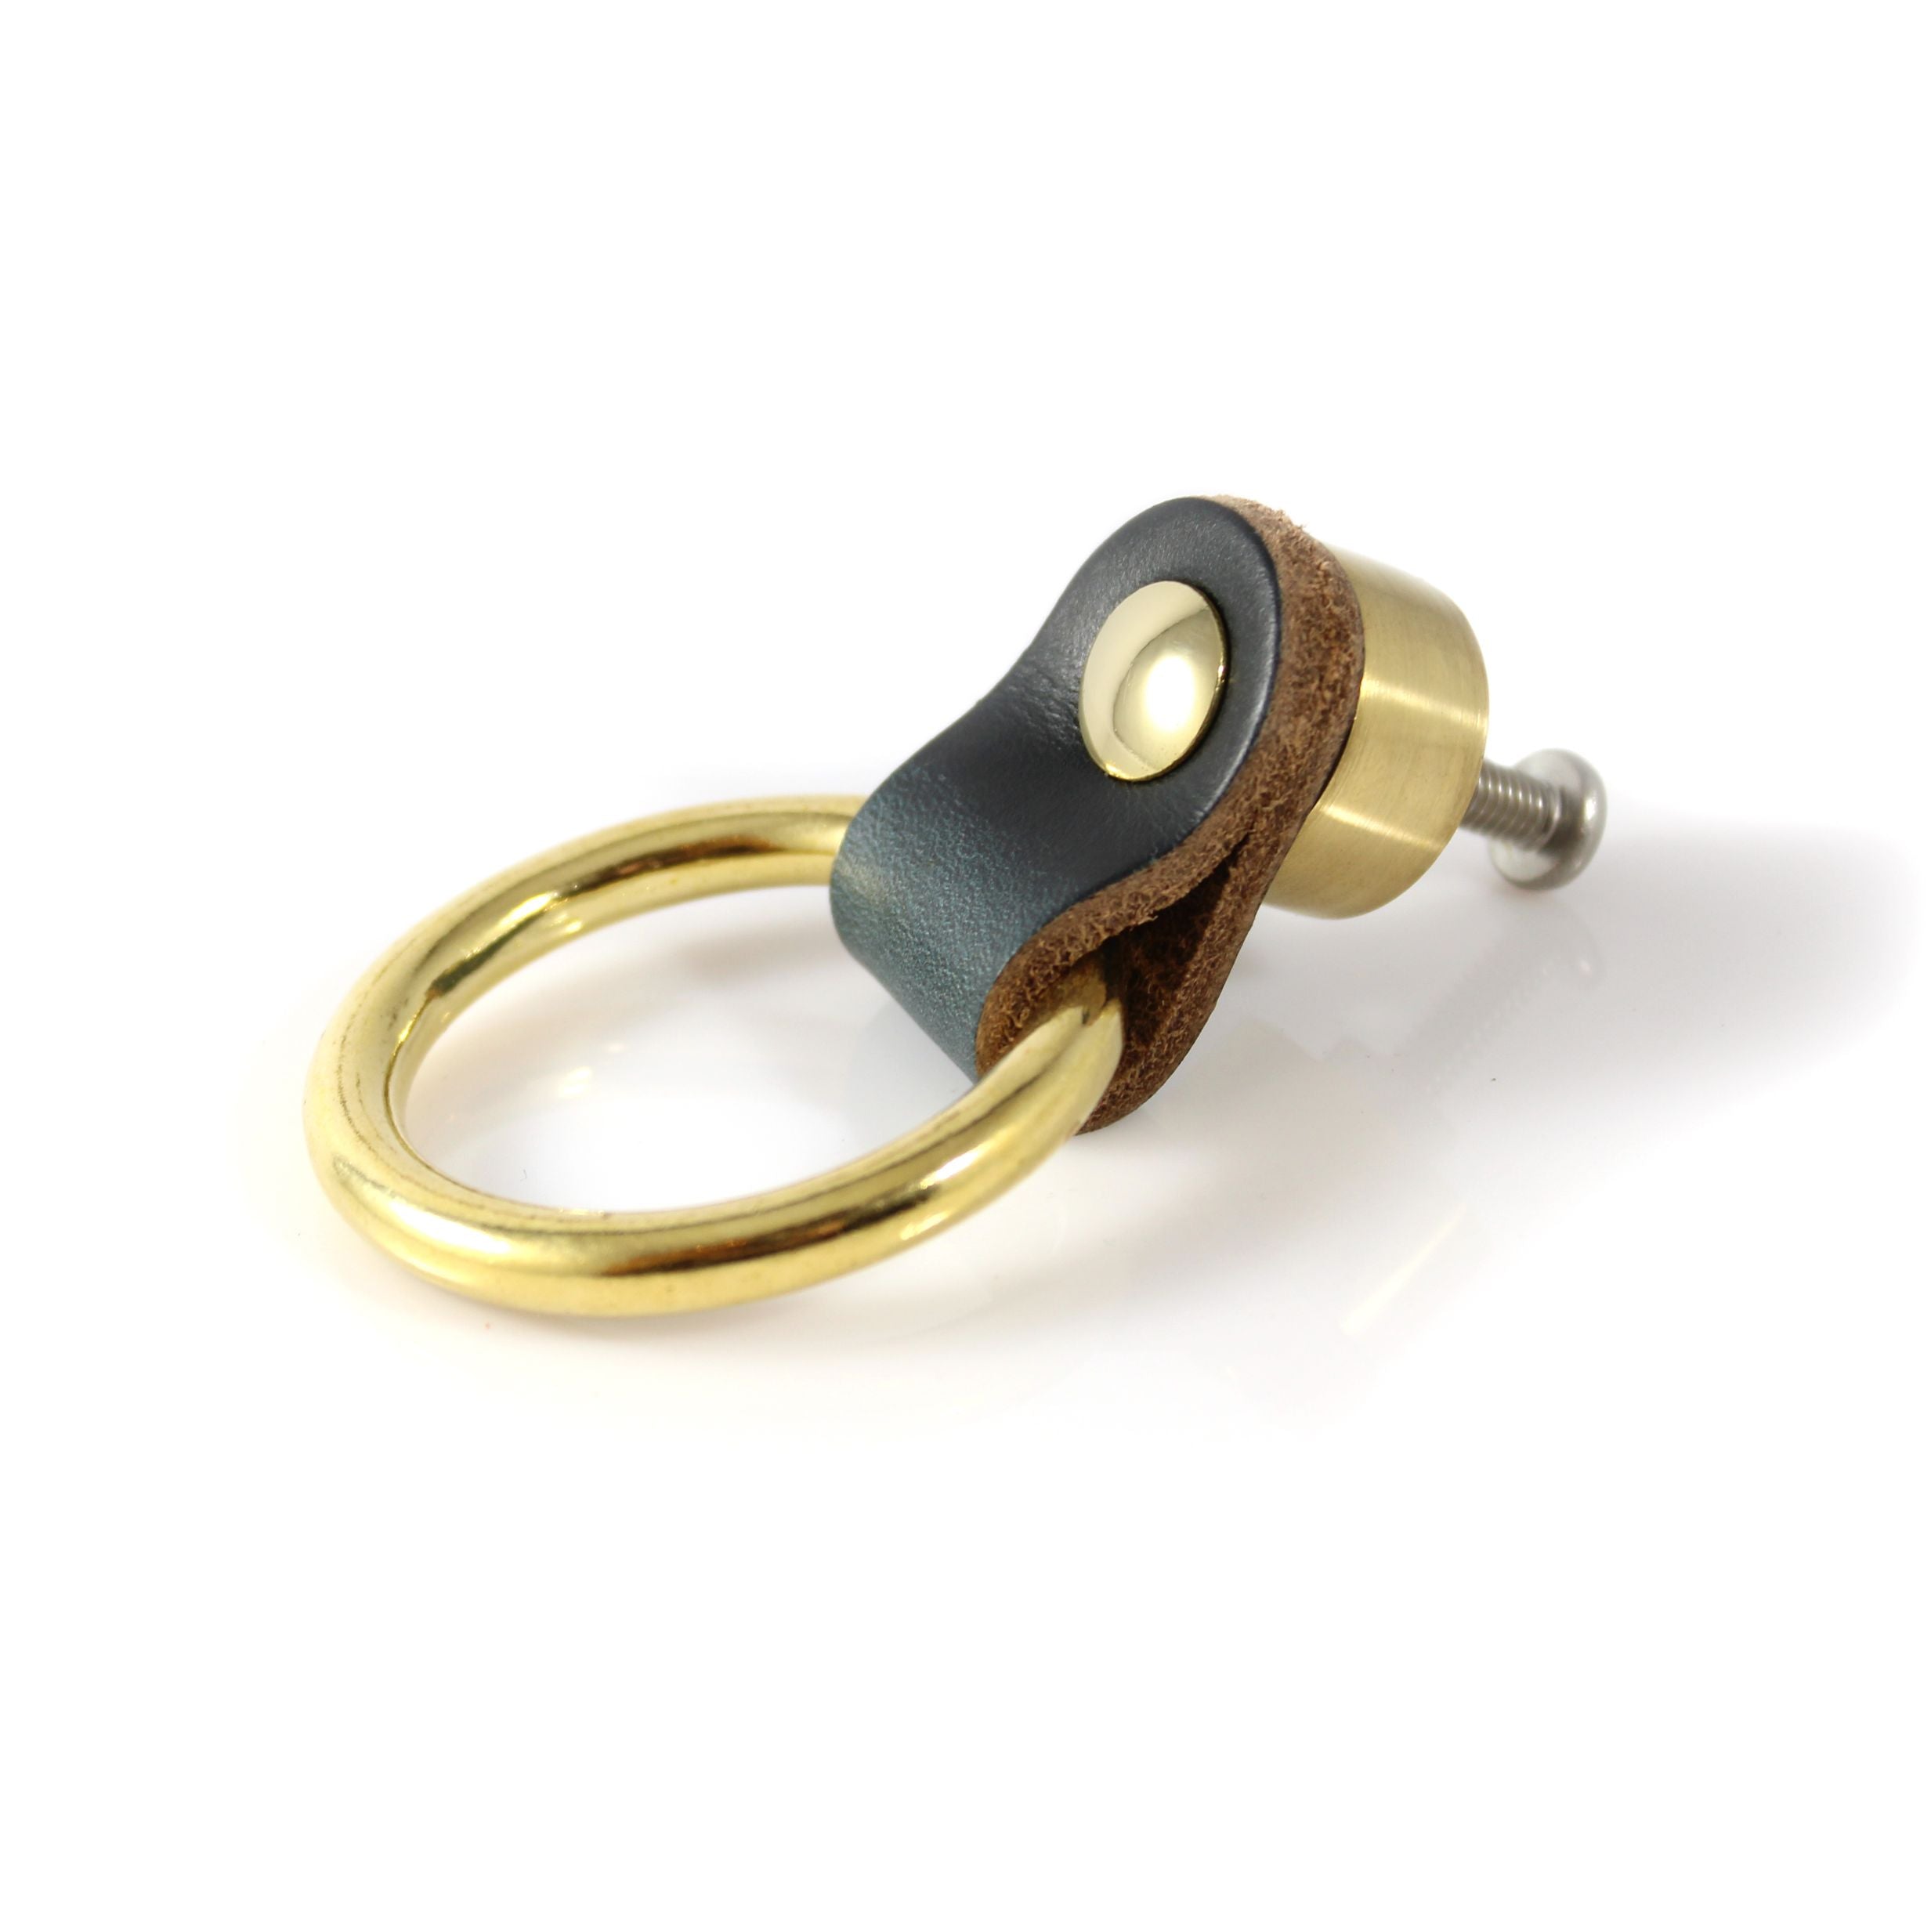 Solid Brass Plate Ring Pull with Escutcheon - Lee Valley Tools